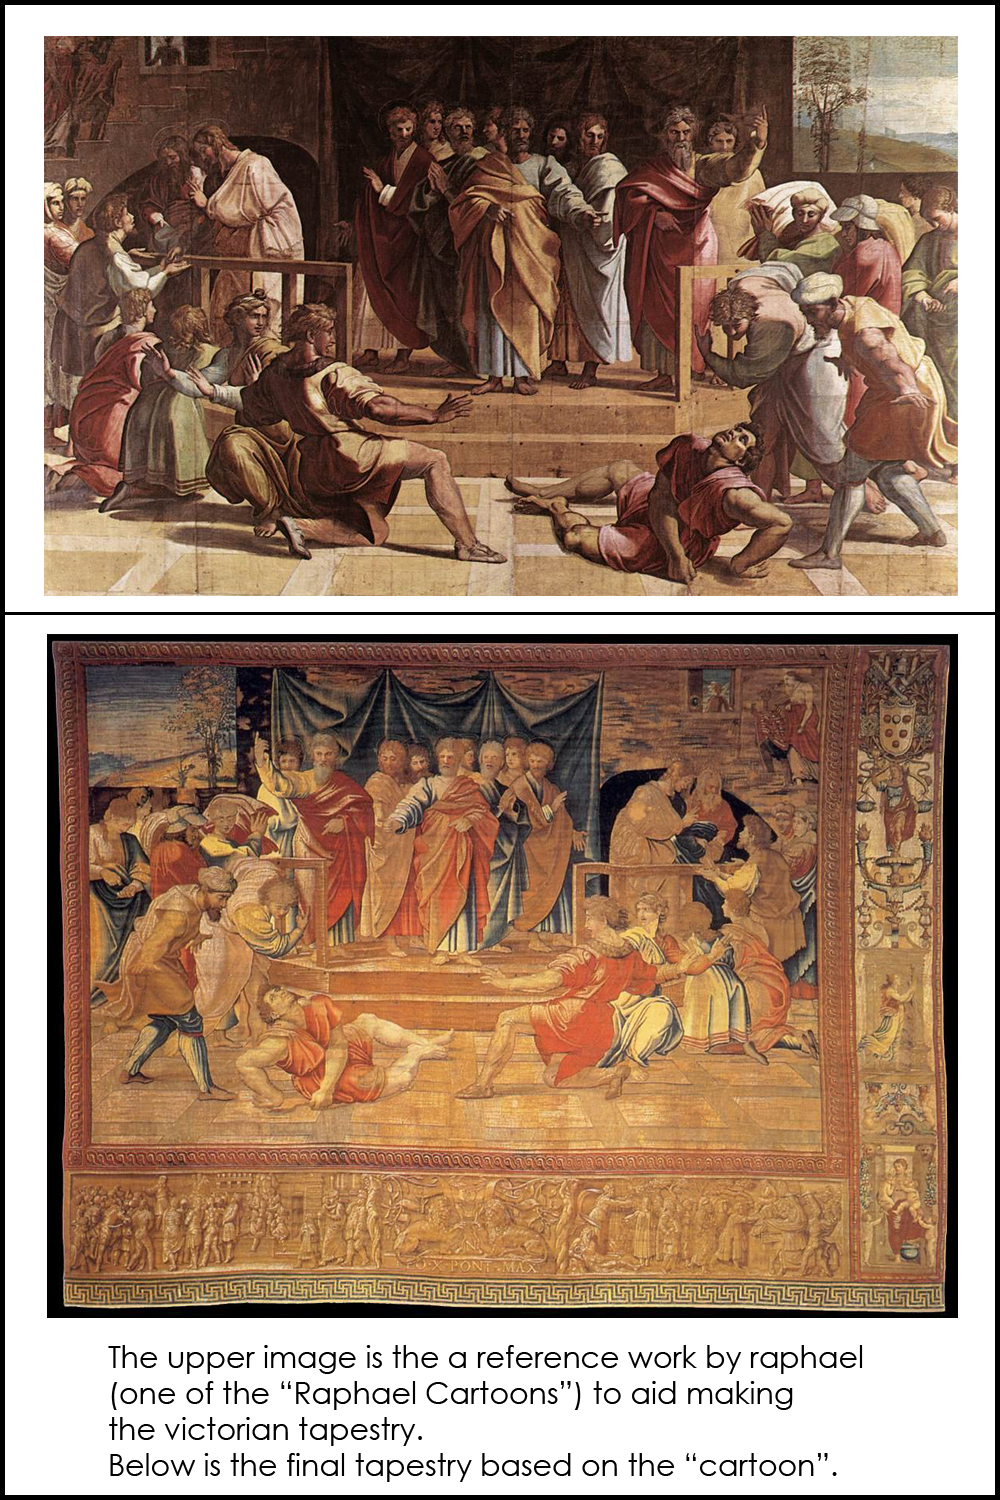 Raphael Cartoon and the tapestry